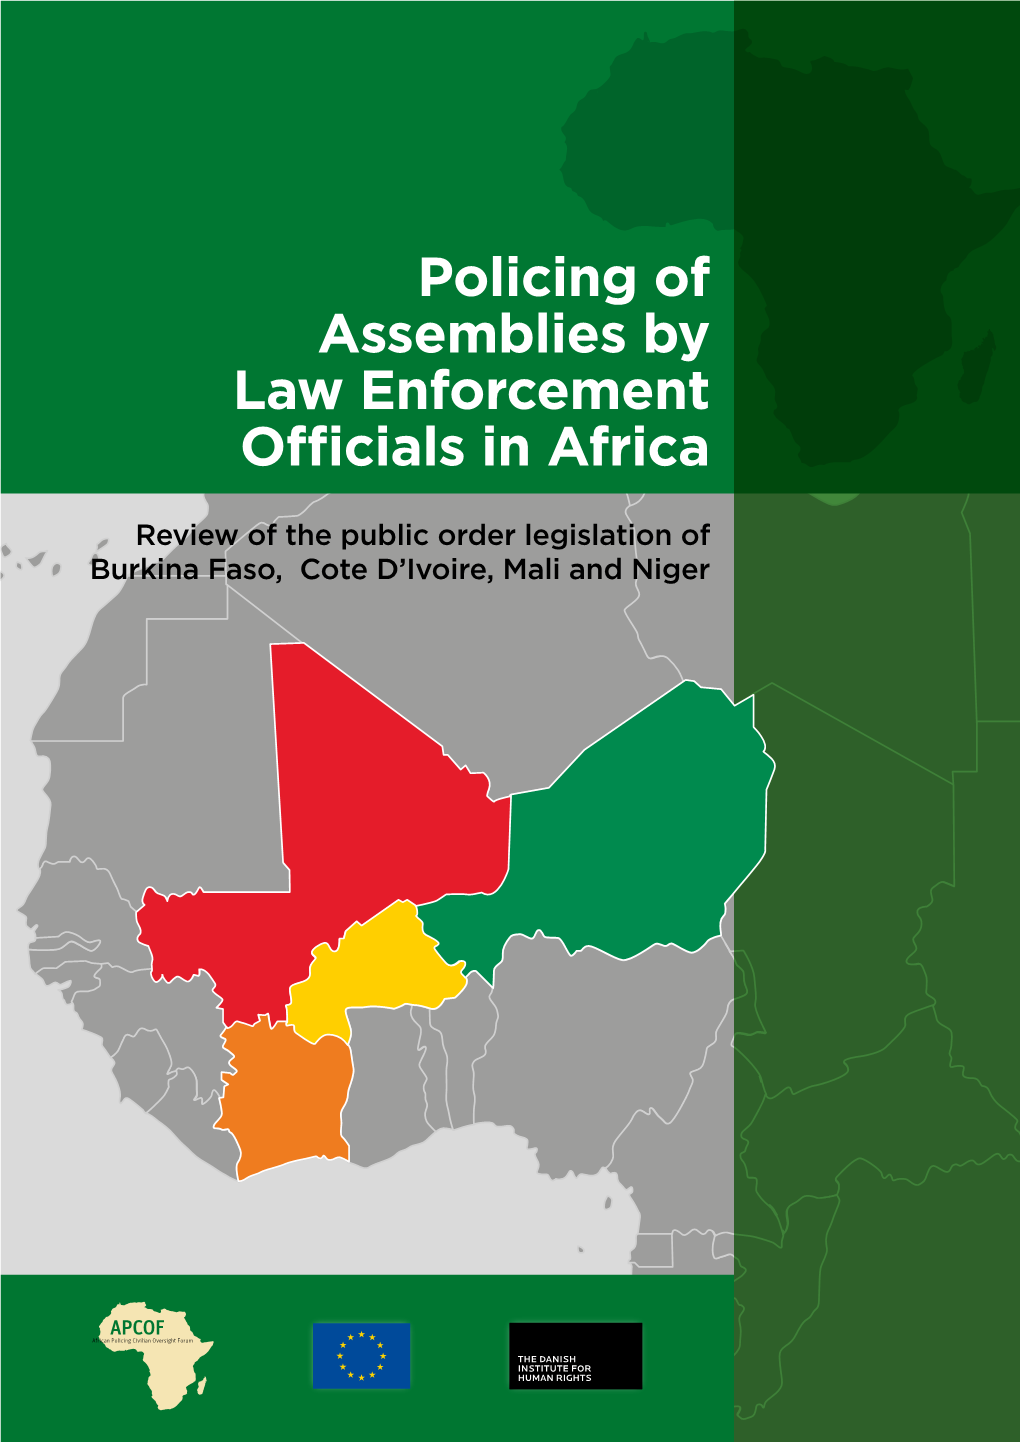 Policing of Assemblies by Law Enforcement Officials in Africa